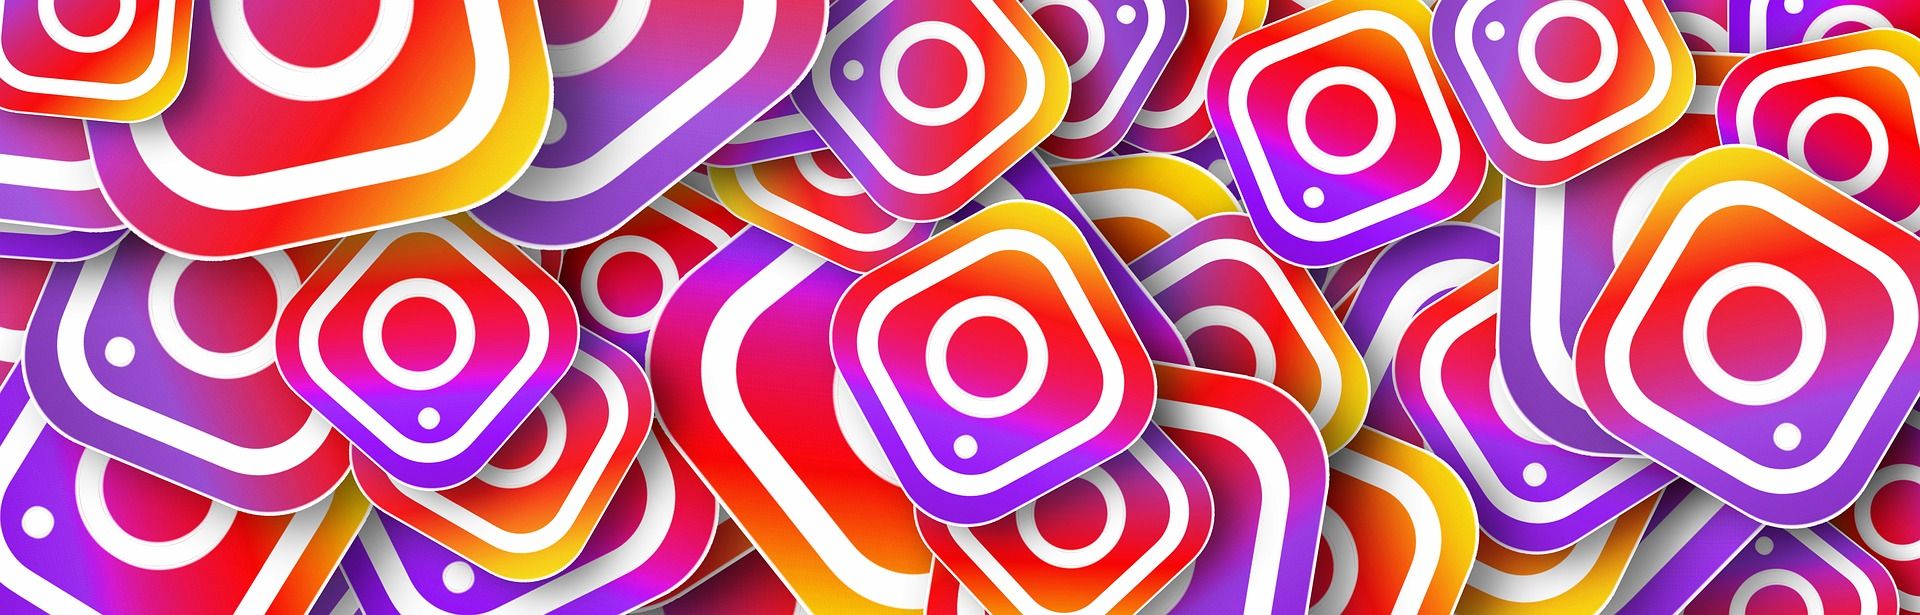 Campagne pay per click Instagram